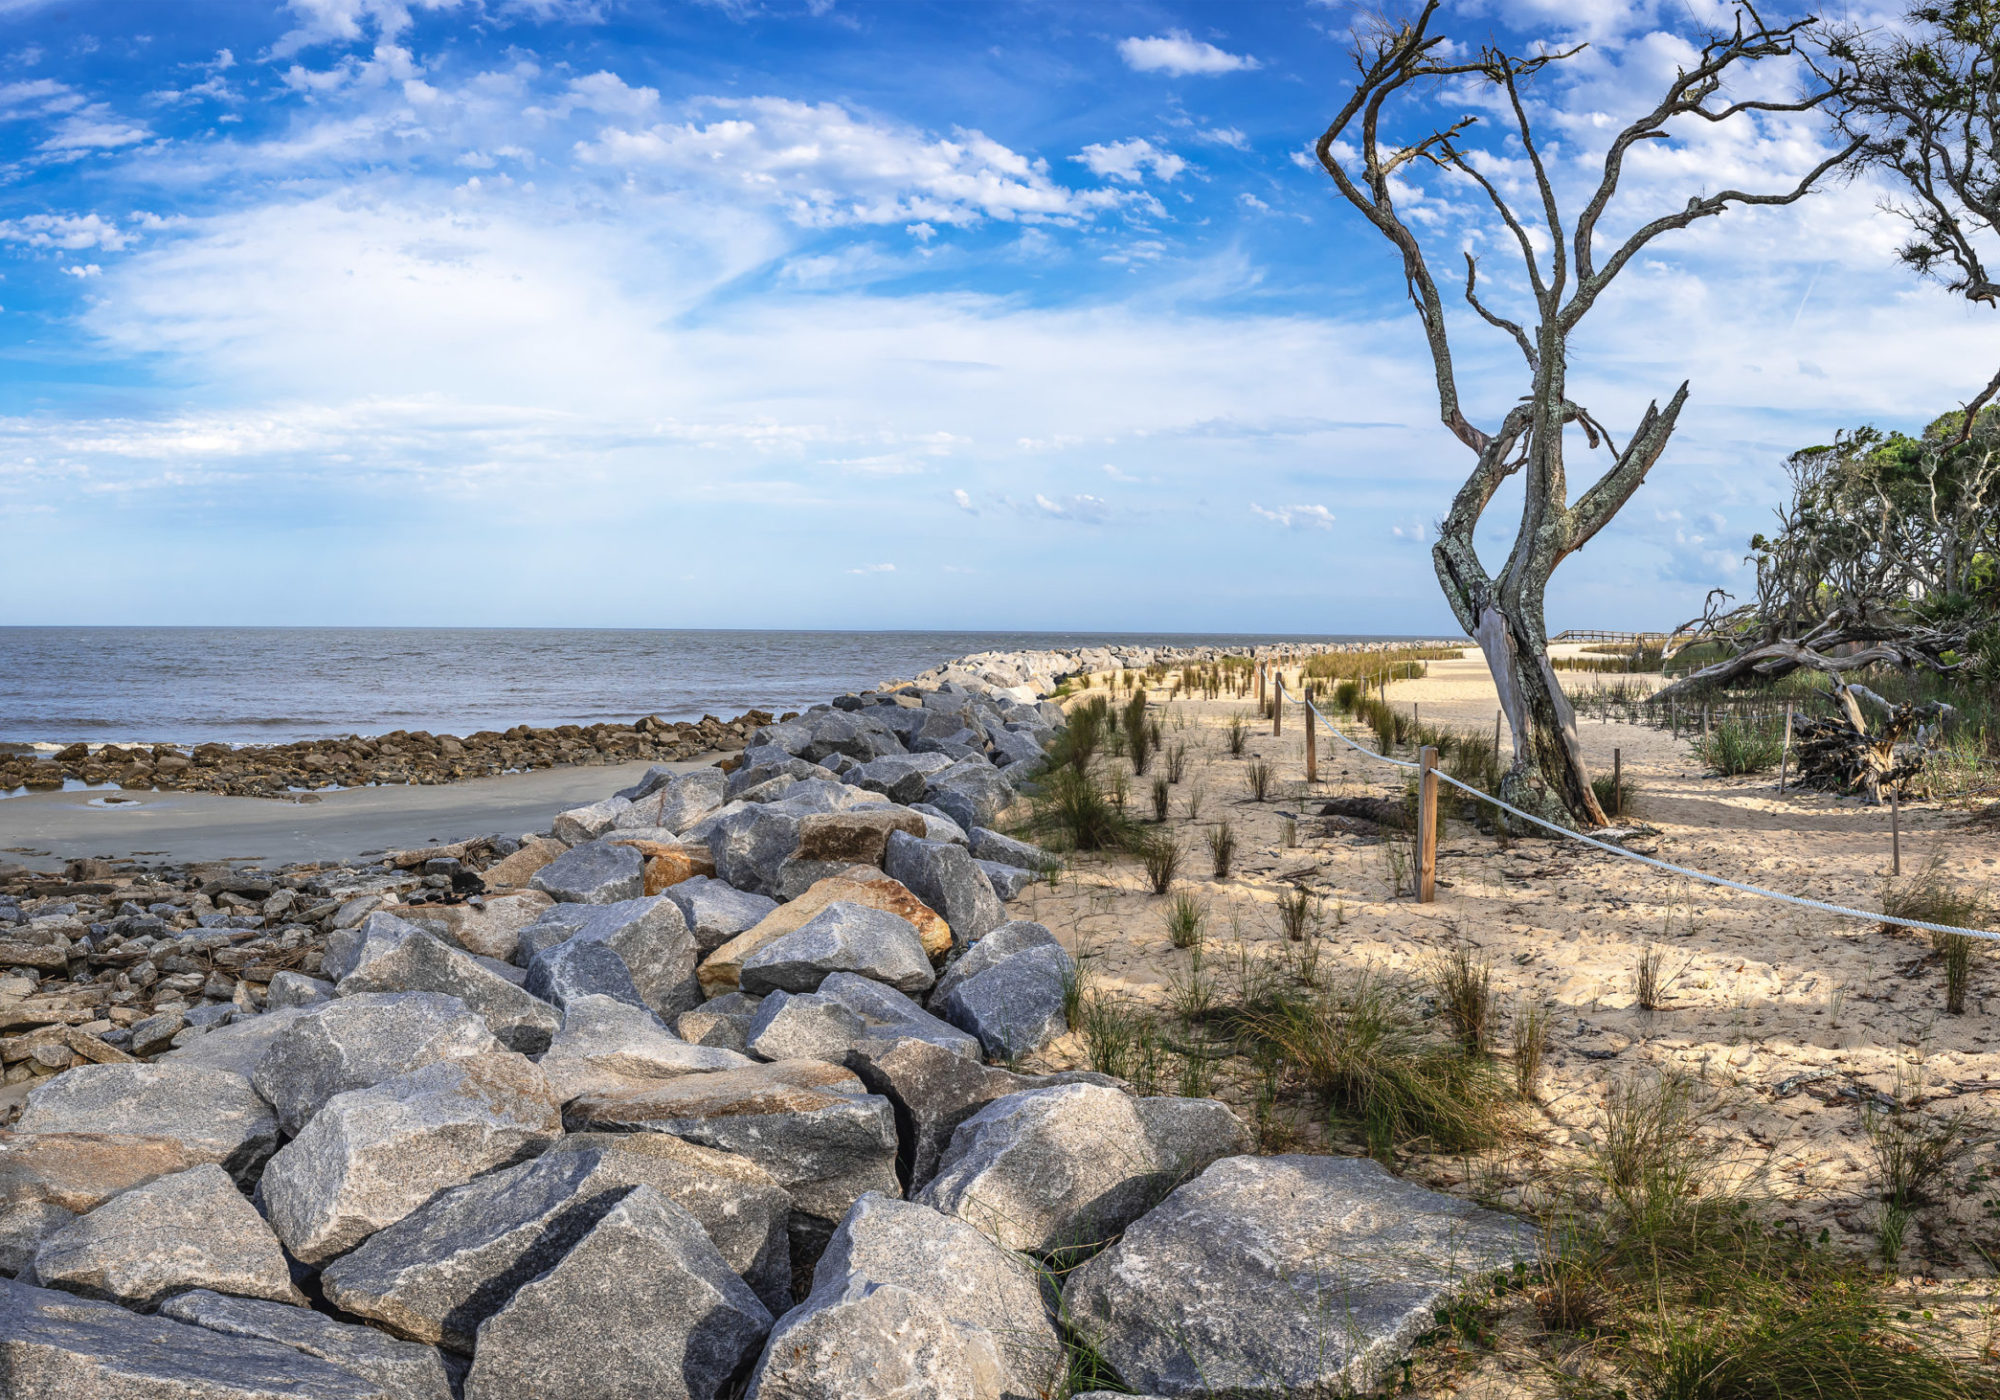 Officials have erected a small, rocky seawall to preserve this beach, just south of Driftwood beach, and on the northeastern side Jekyll Island. Credit: Teake Zuidema for Nexus Media News